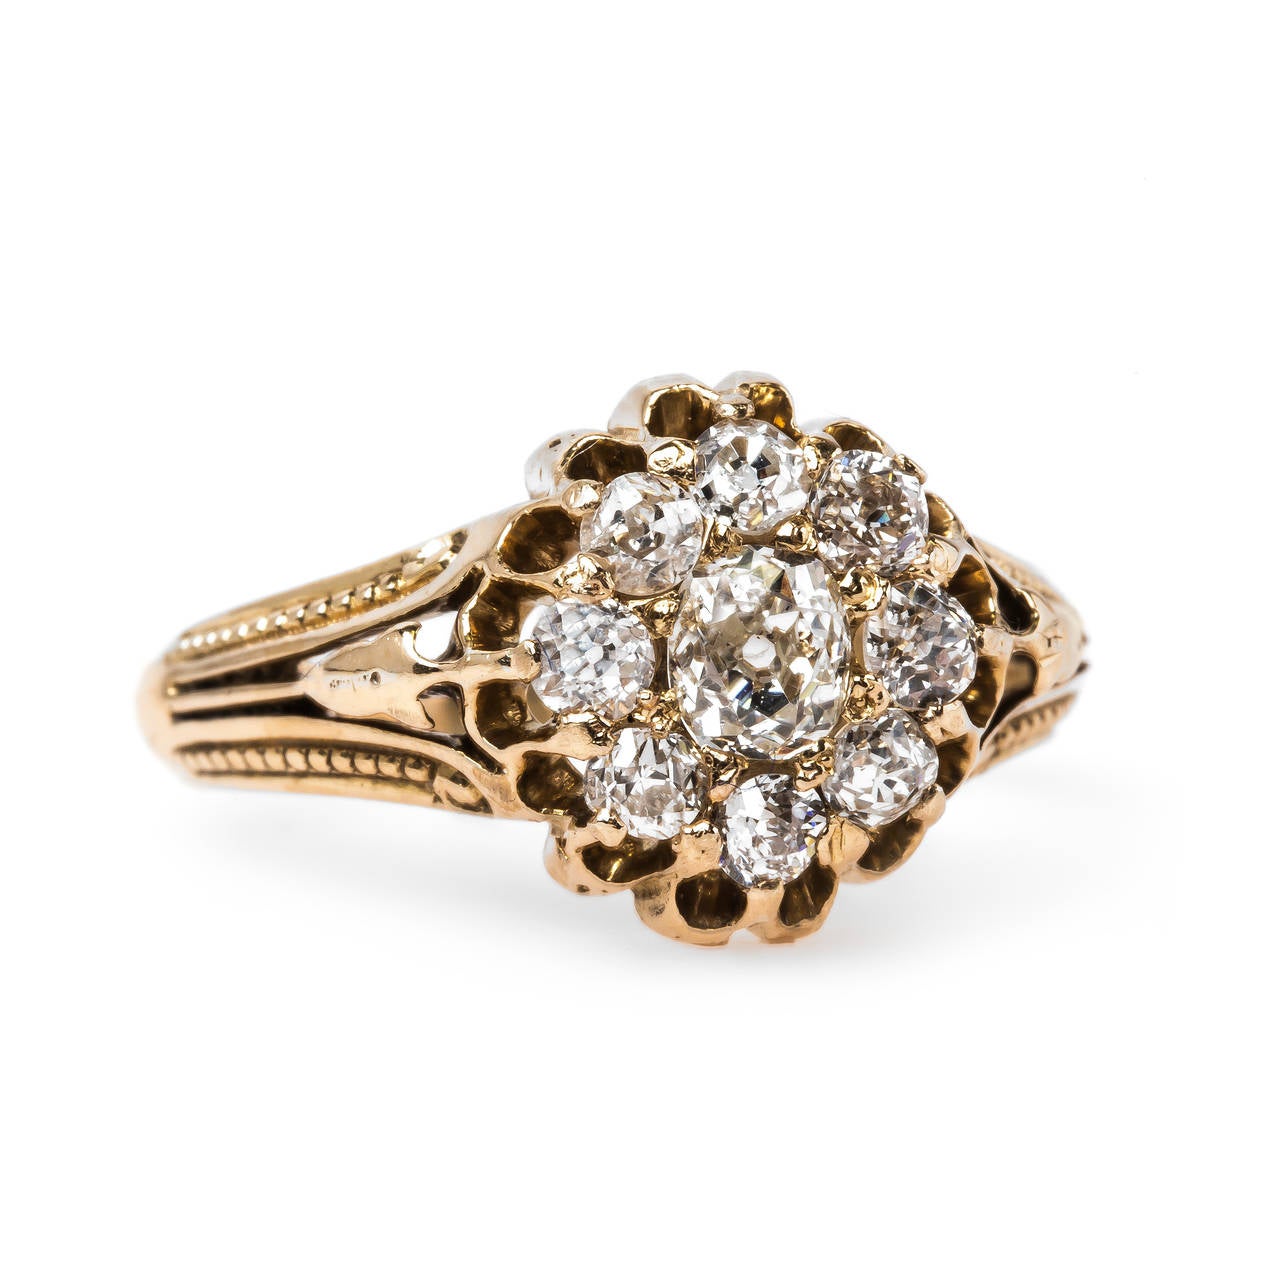 Penfield is an intriguing authentic Victorian era (circa 1880) 18k yellow gold featuring a sparkling cluster of nine Old Mine Cushion and Old Mine Cut diamonds totaling approximately 0.85ct. graded J-K color and SI clarity. Penfield is further